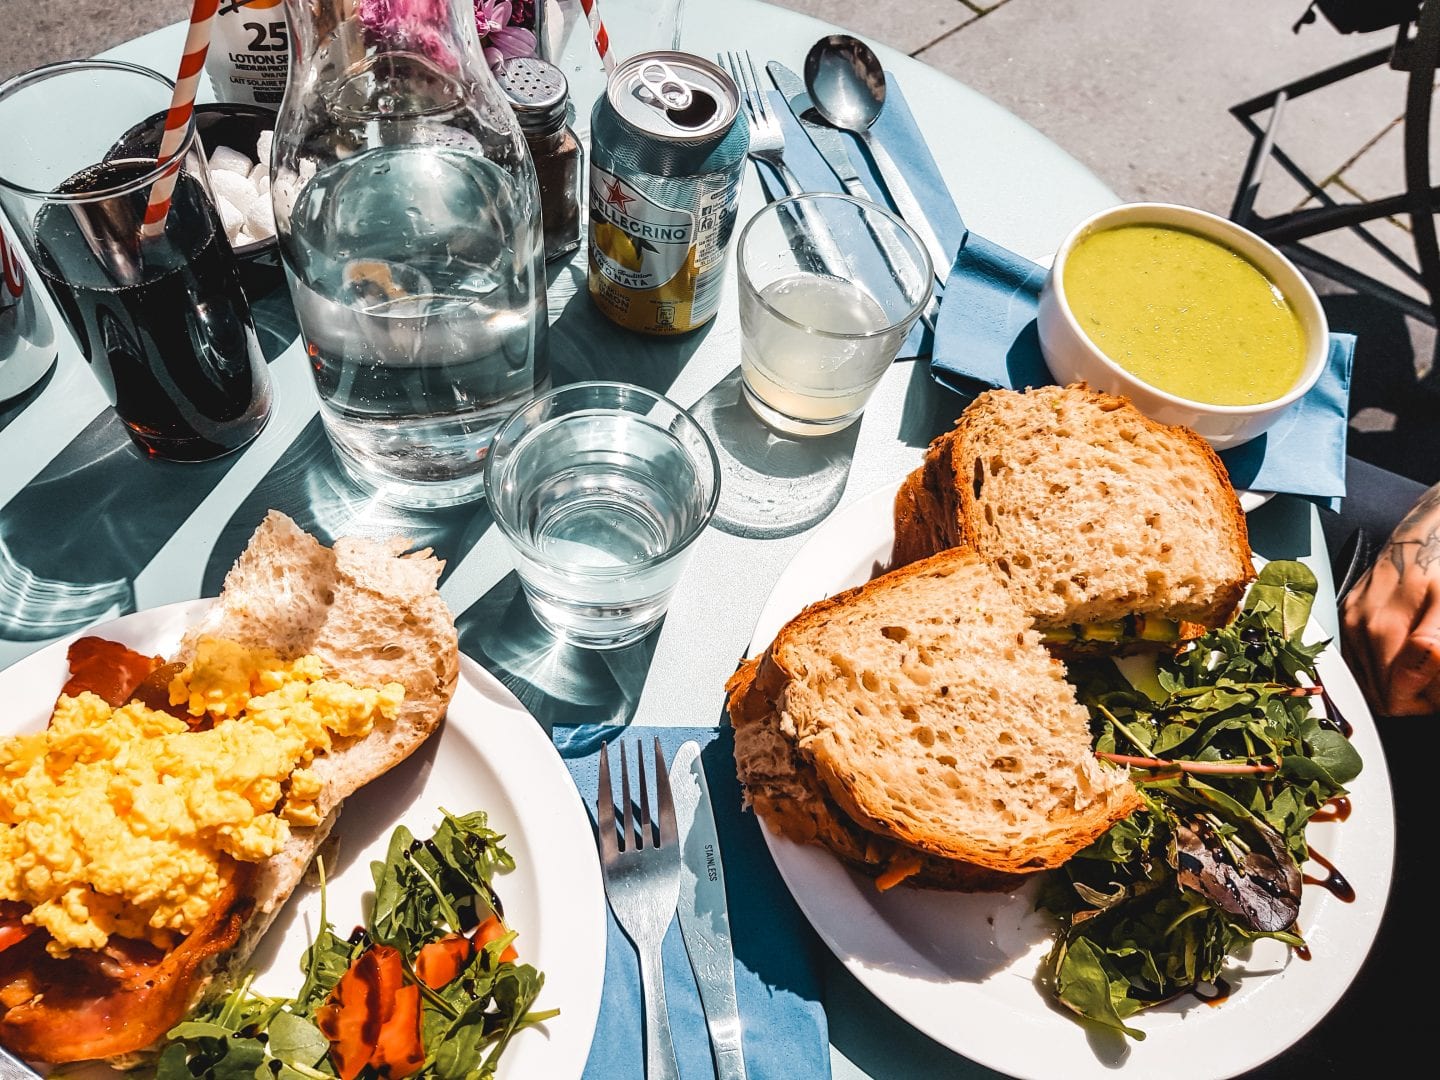 lunch: sandwiches and soup in the sun